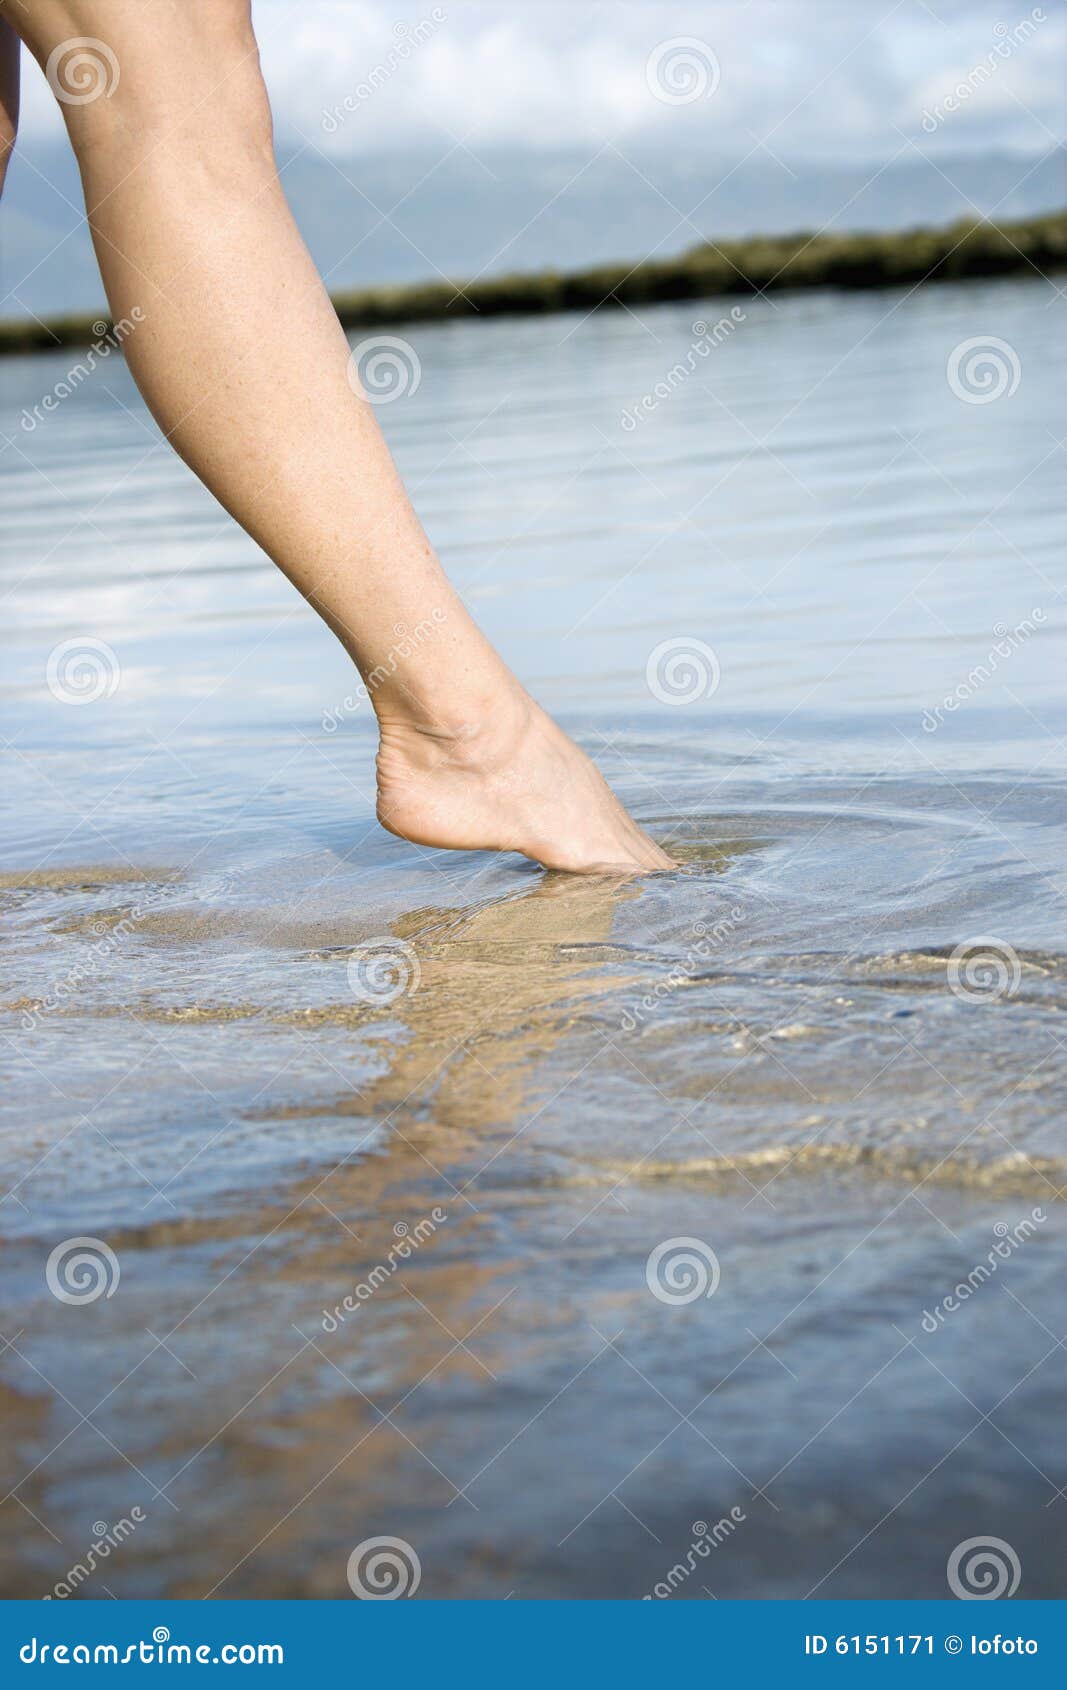 woman dipping toe in water.